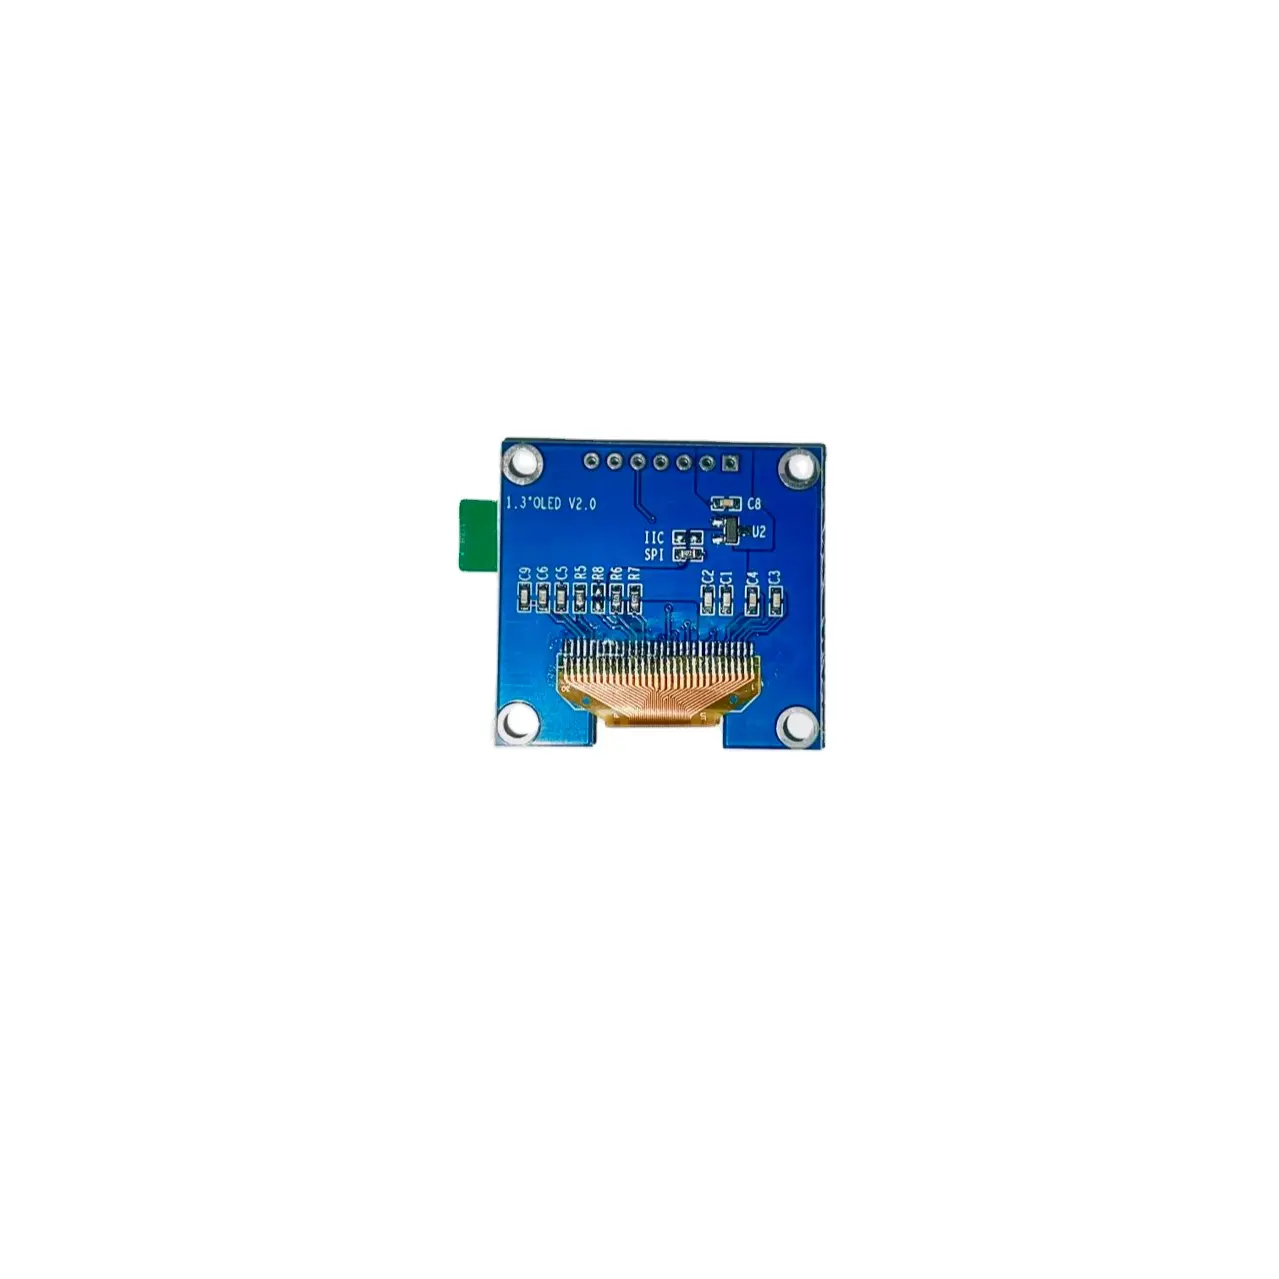 1.3" Inch SSD1306 128*64 OLED Module For Arduino